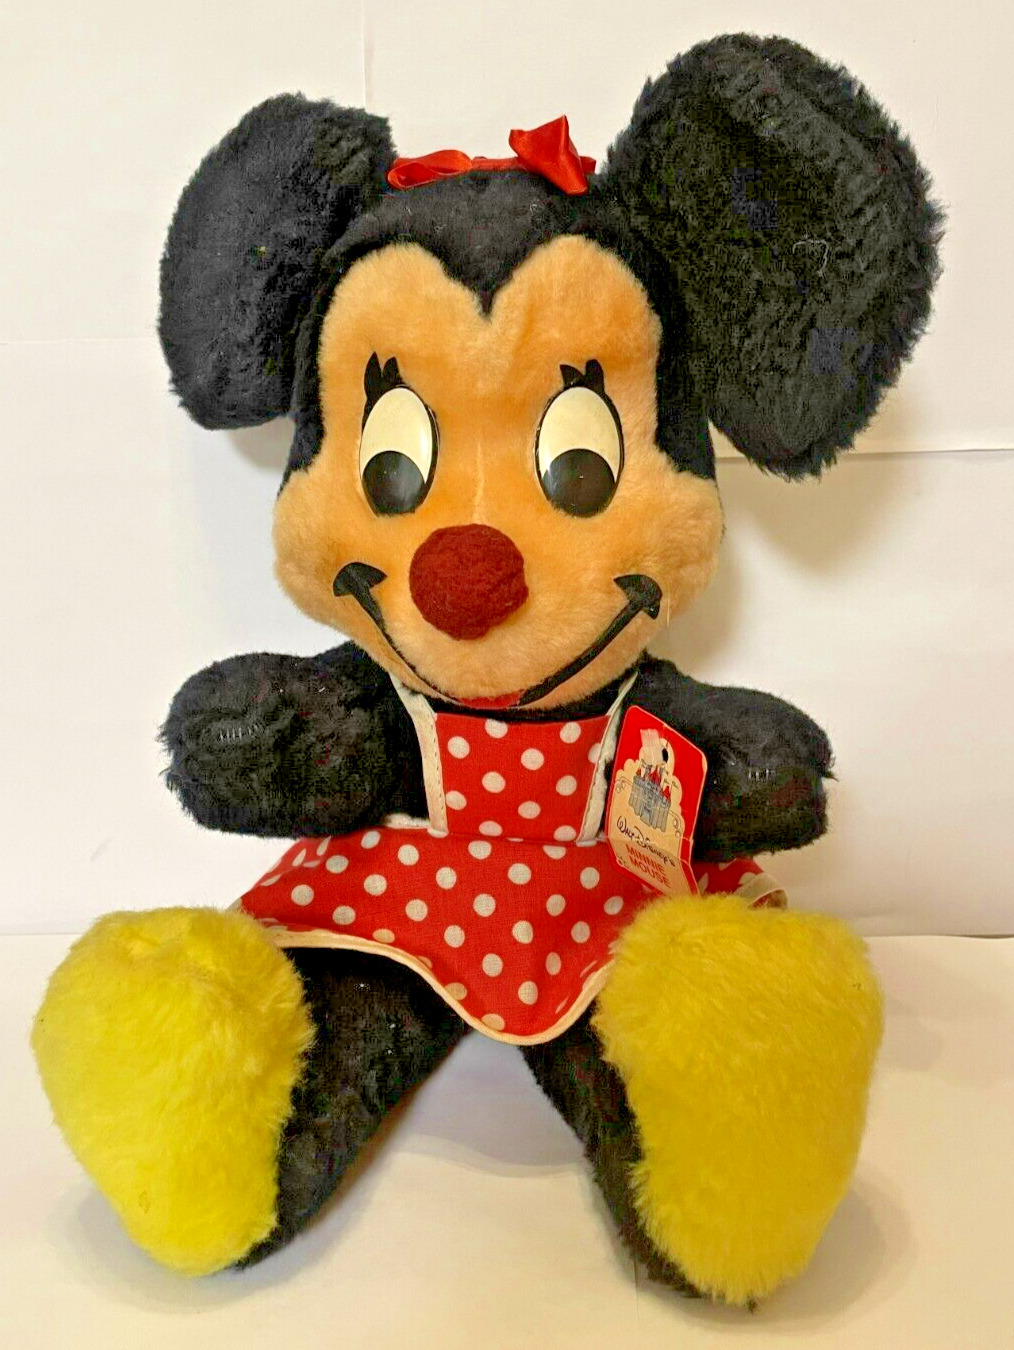 Vintage Mini Mouse  1950's-60's Era Stuffed Doll New With Tags Please Read